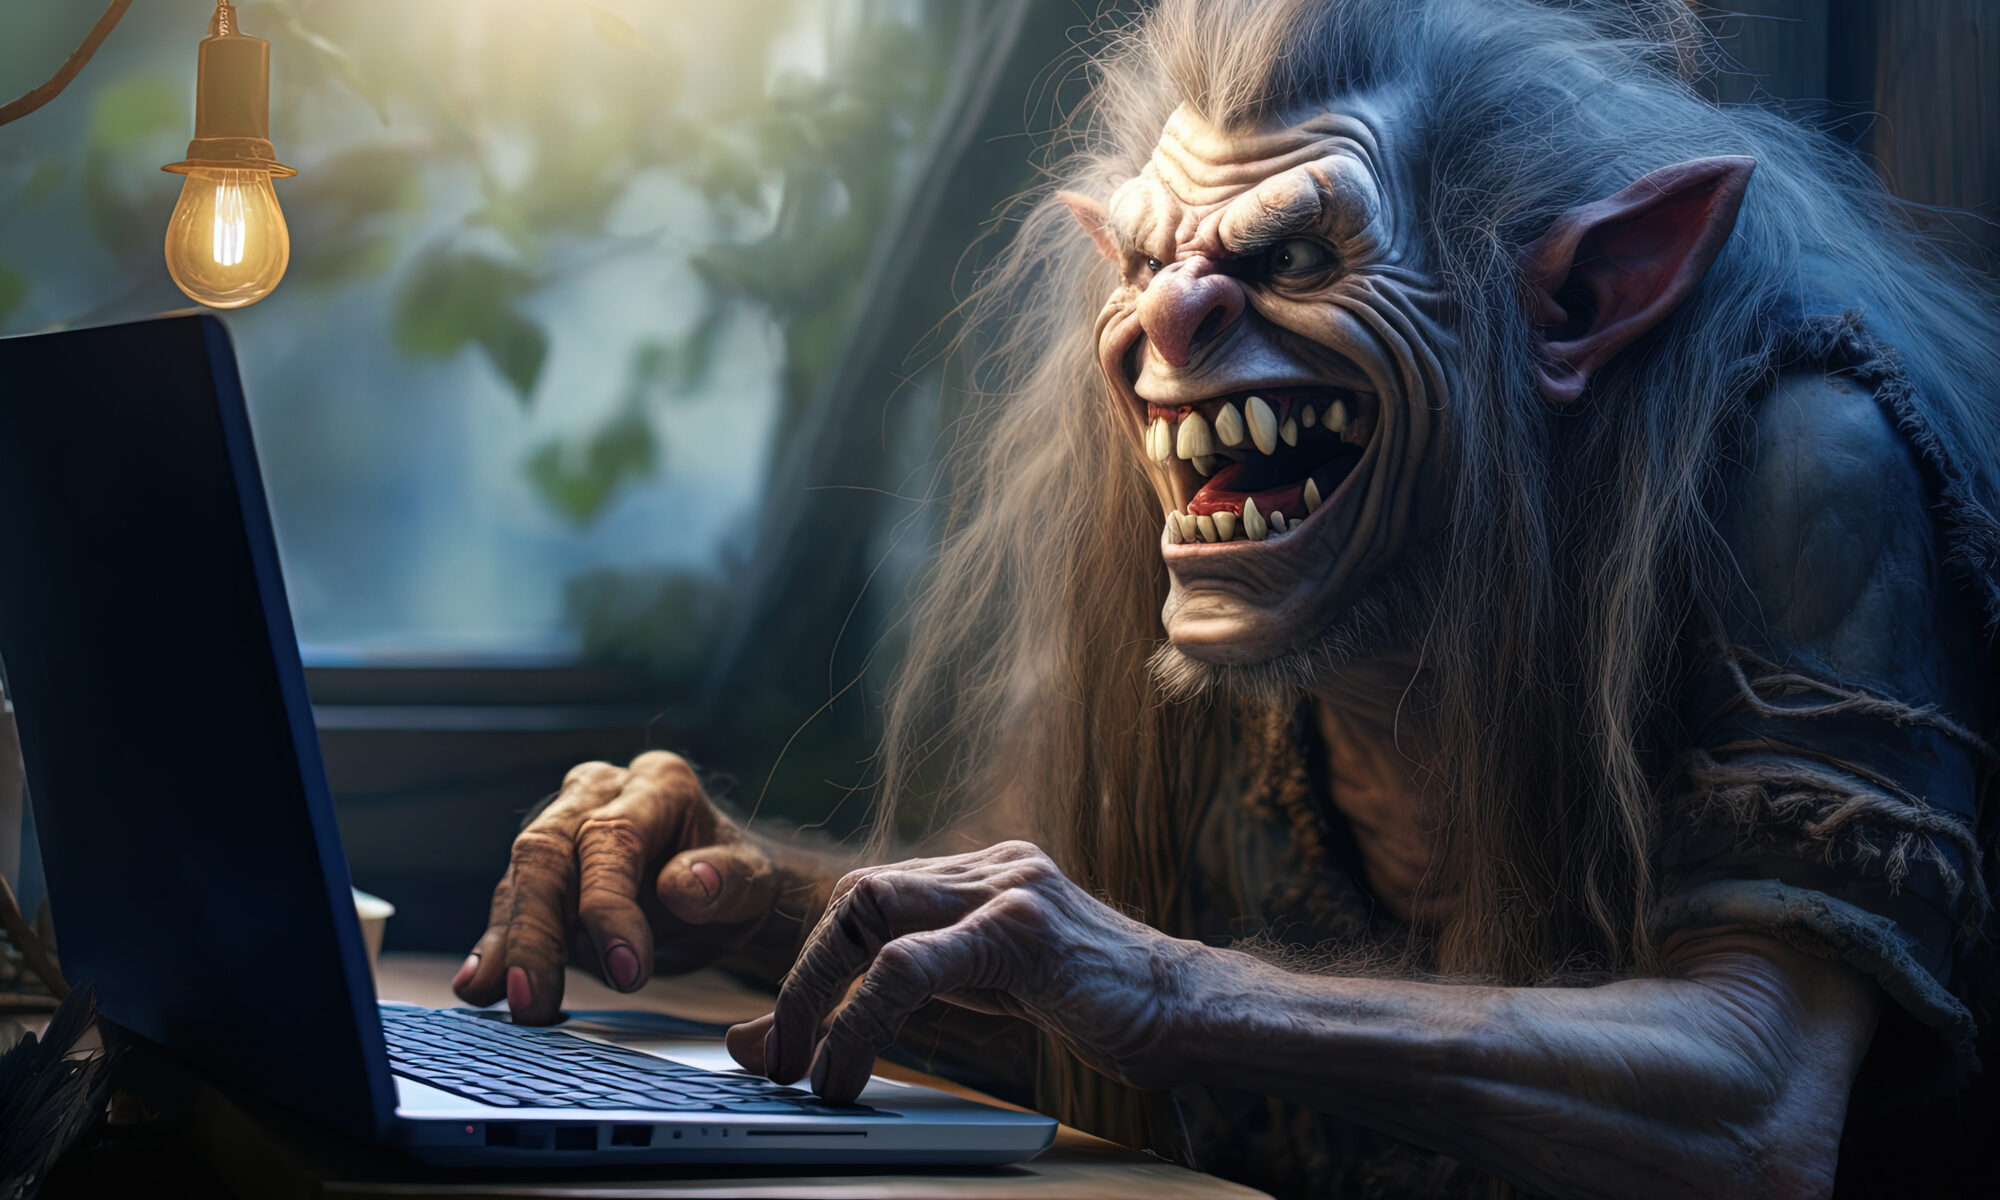 Internet troll or cyberbully posting hate speech on Social Media, in comments online.